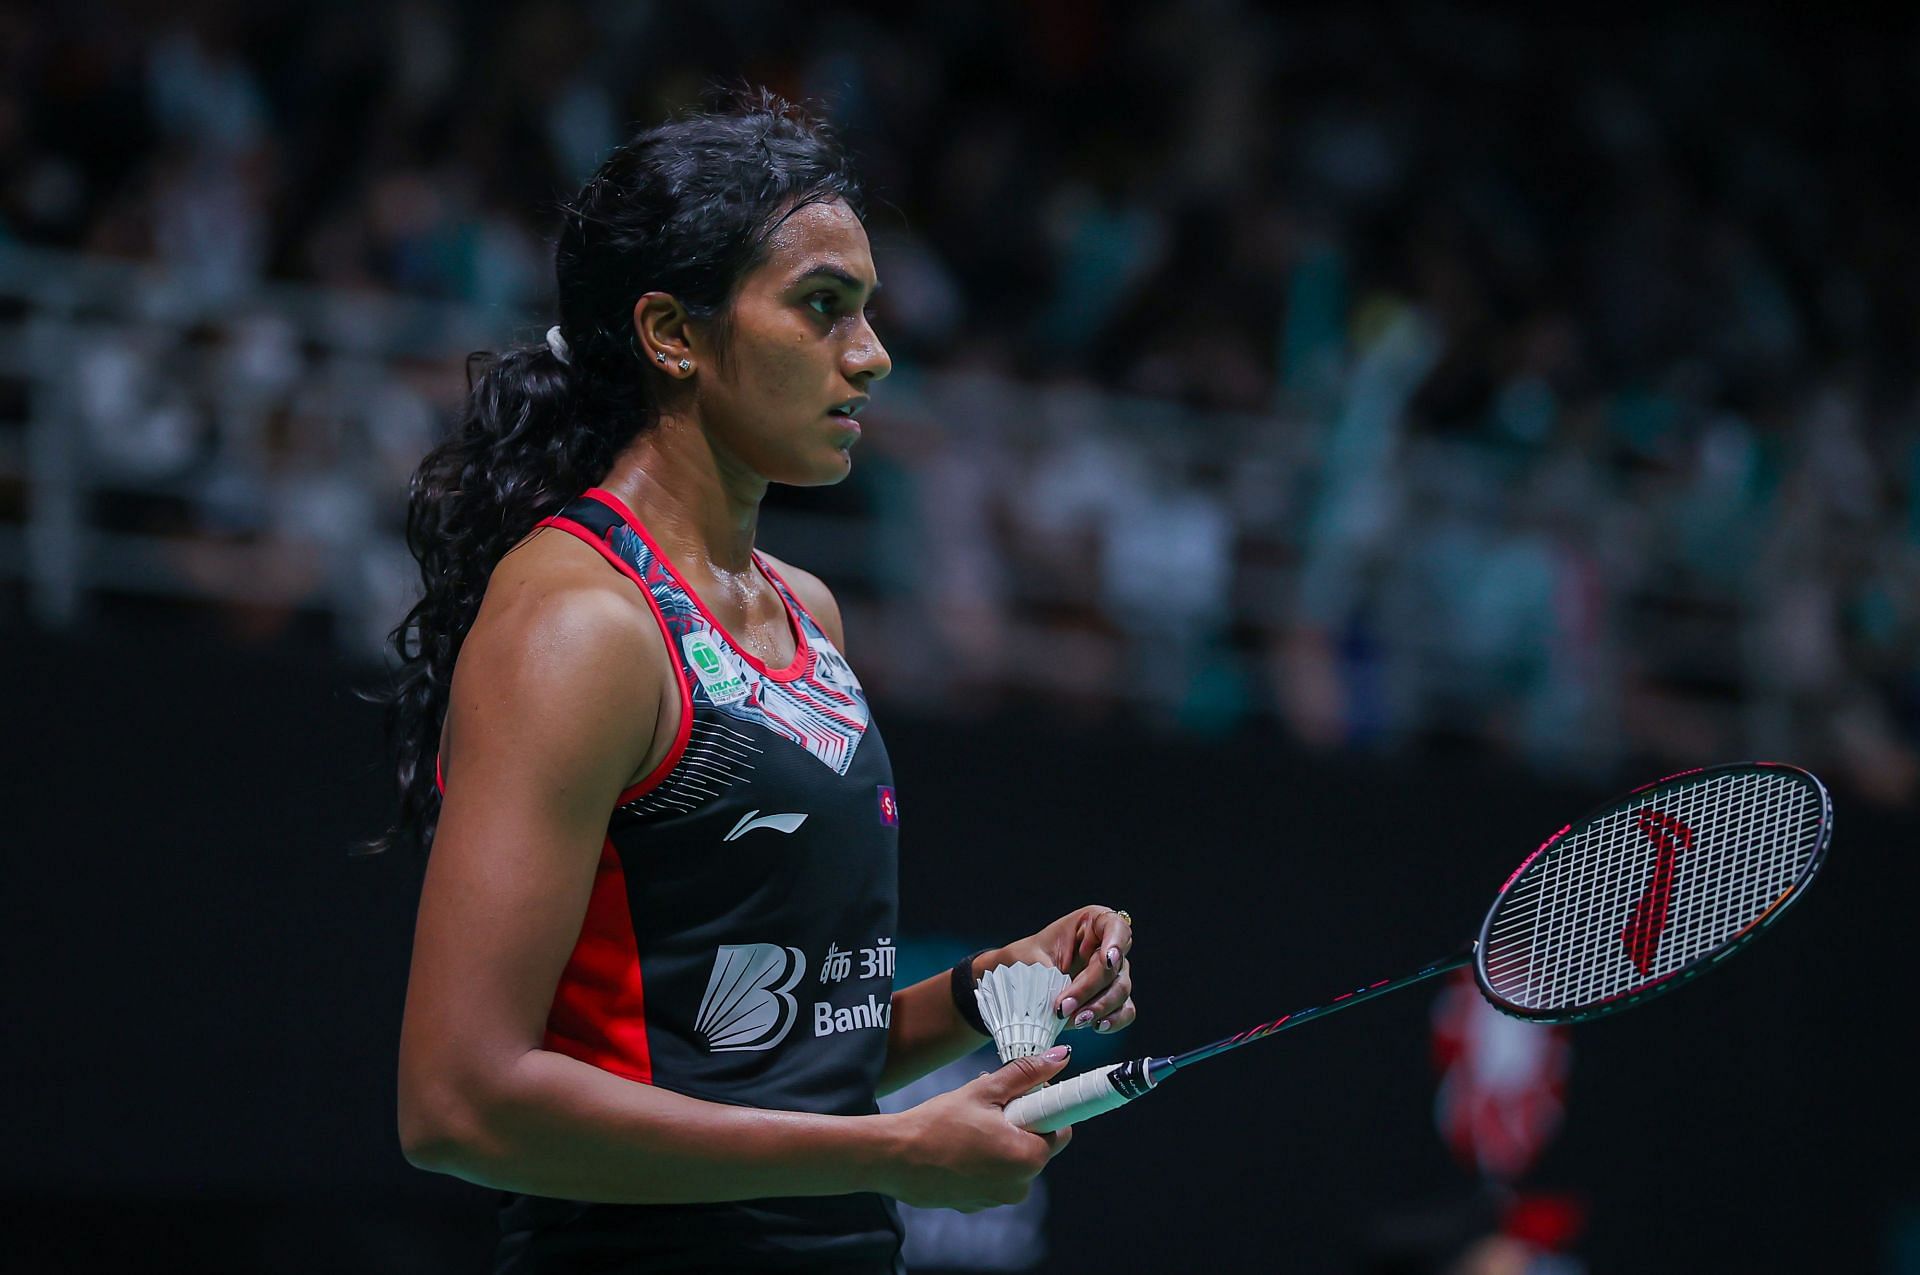 Sindhu in action at the Malaysia Open (Image courtesy: Getty Images)